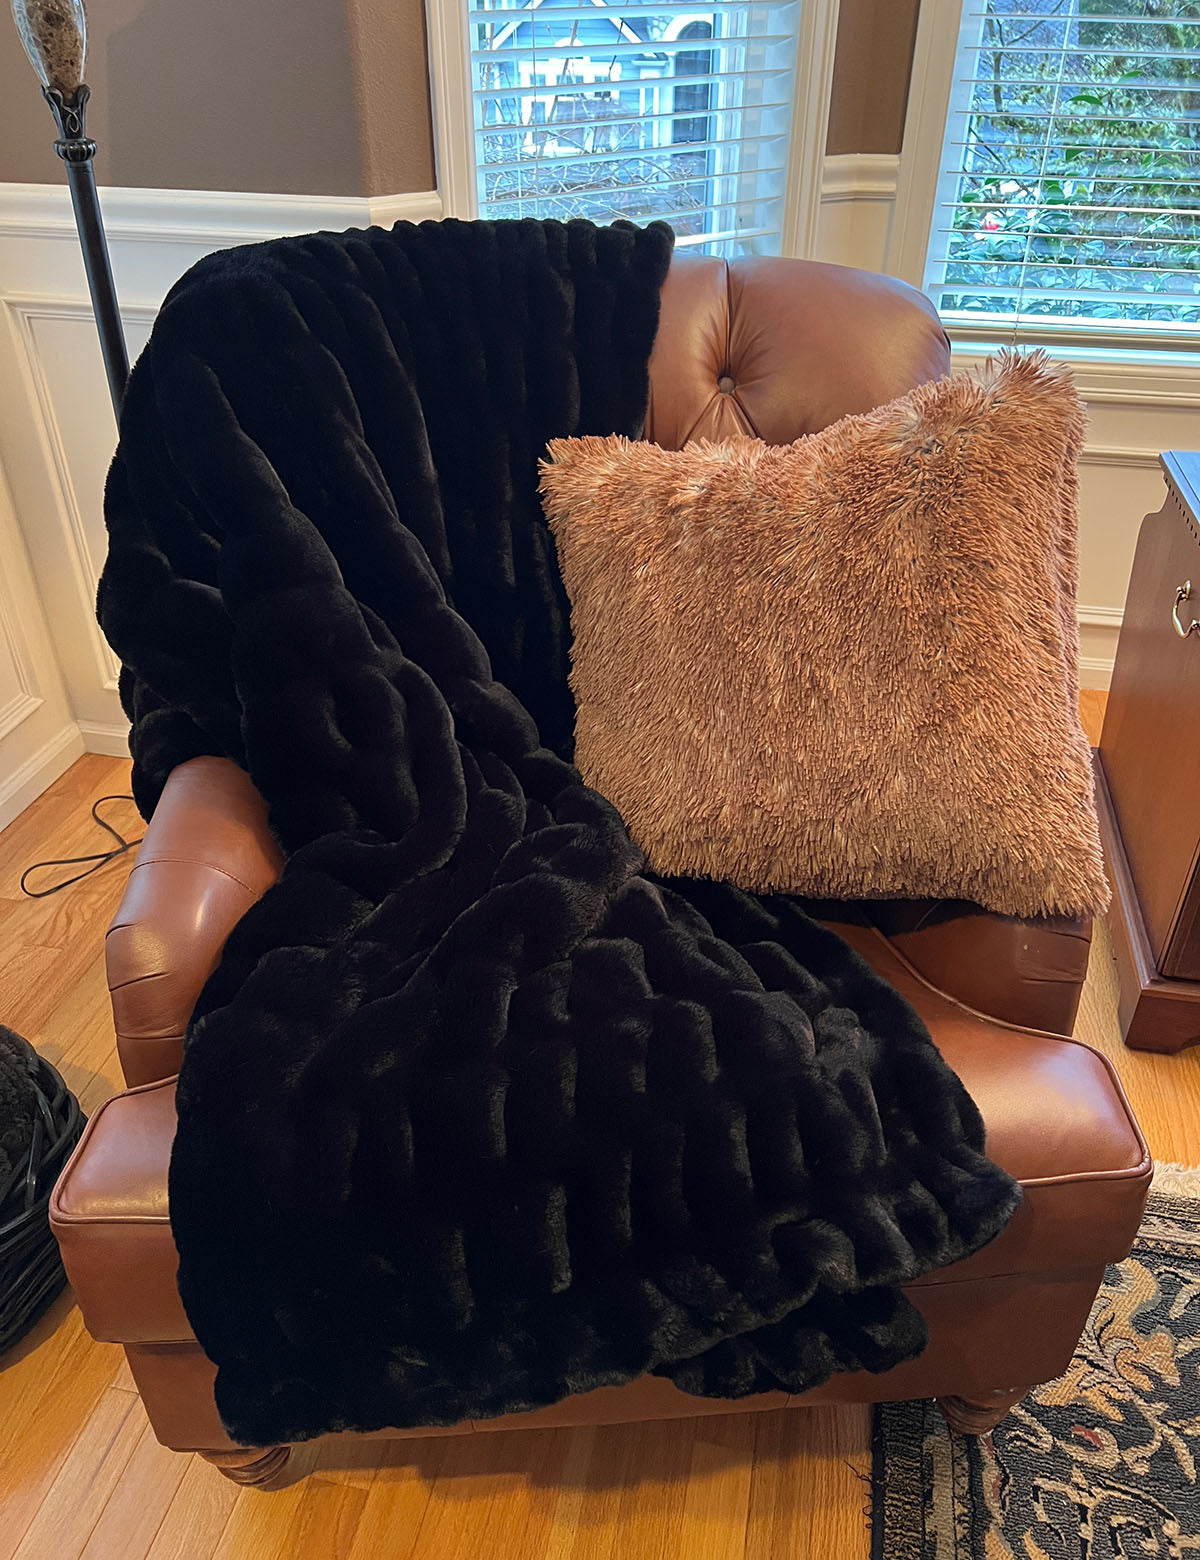 Royal Opulence Faux Fur Throw in Onyx with a Red Fox Pillow, draped over a leather chair. Handmade by Pandemonium Seattle.